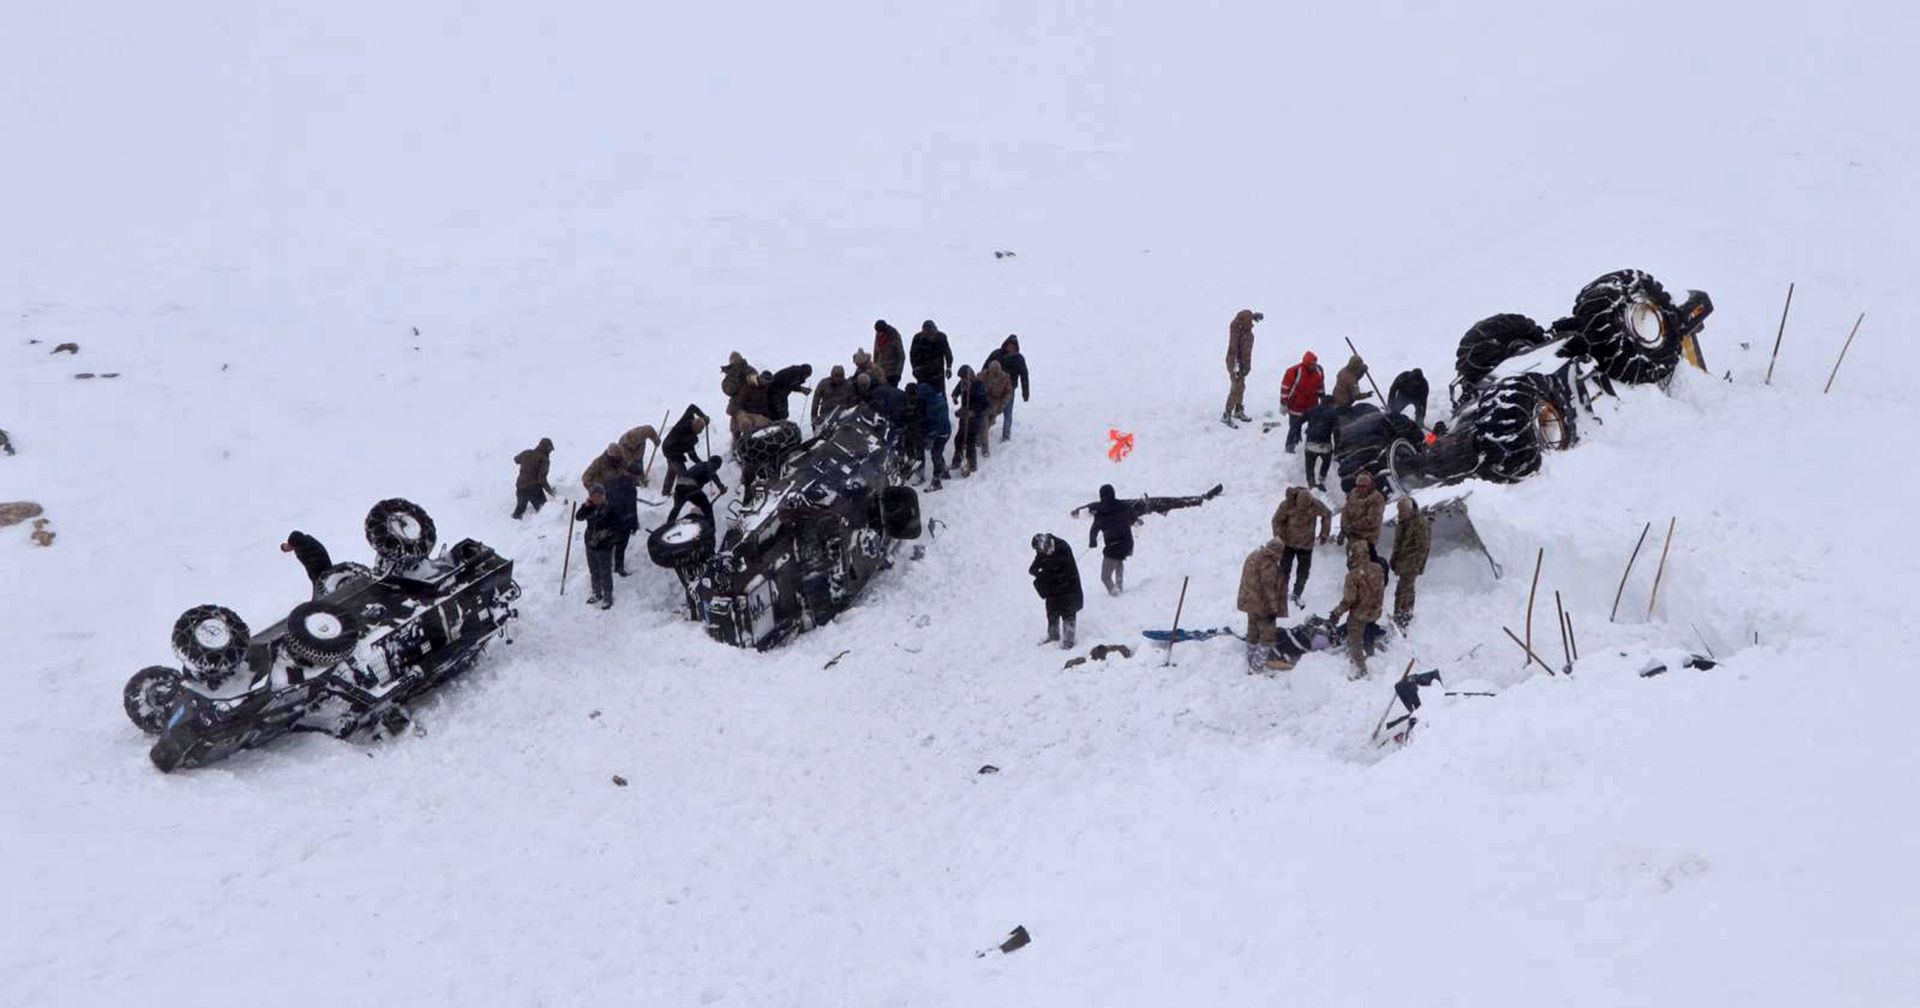 epa08194650 Turkish soldiers and rescue workers try to rescue people after double avalanche at Bahcesaray district in Van city, east of Turkey 05 February 2020. Twenty-one people have been killed and thirty others wounded after two avalanches in Turkey. Rescuers went after theye were called out initially after two people and a minibus were buried under the snow in Bahcesaray district and during the rescue attempt a second avalanche buried more than 50 members of the search and rescue team.  EPA/DHA AGENCY TURKEY OUT